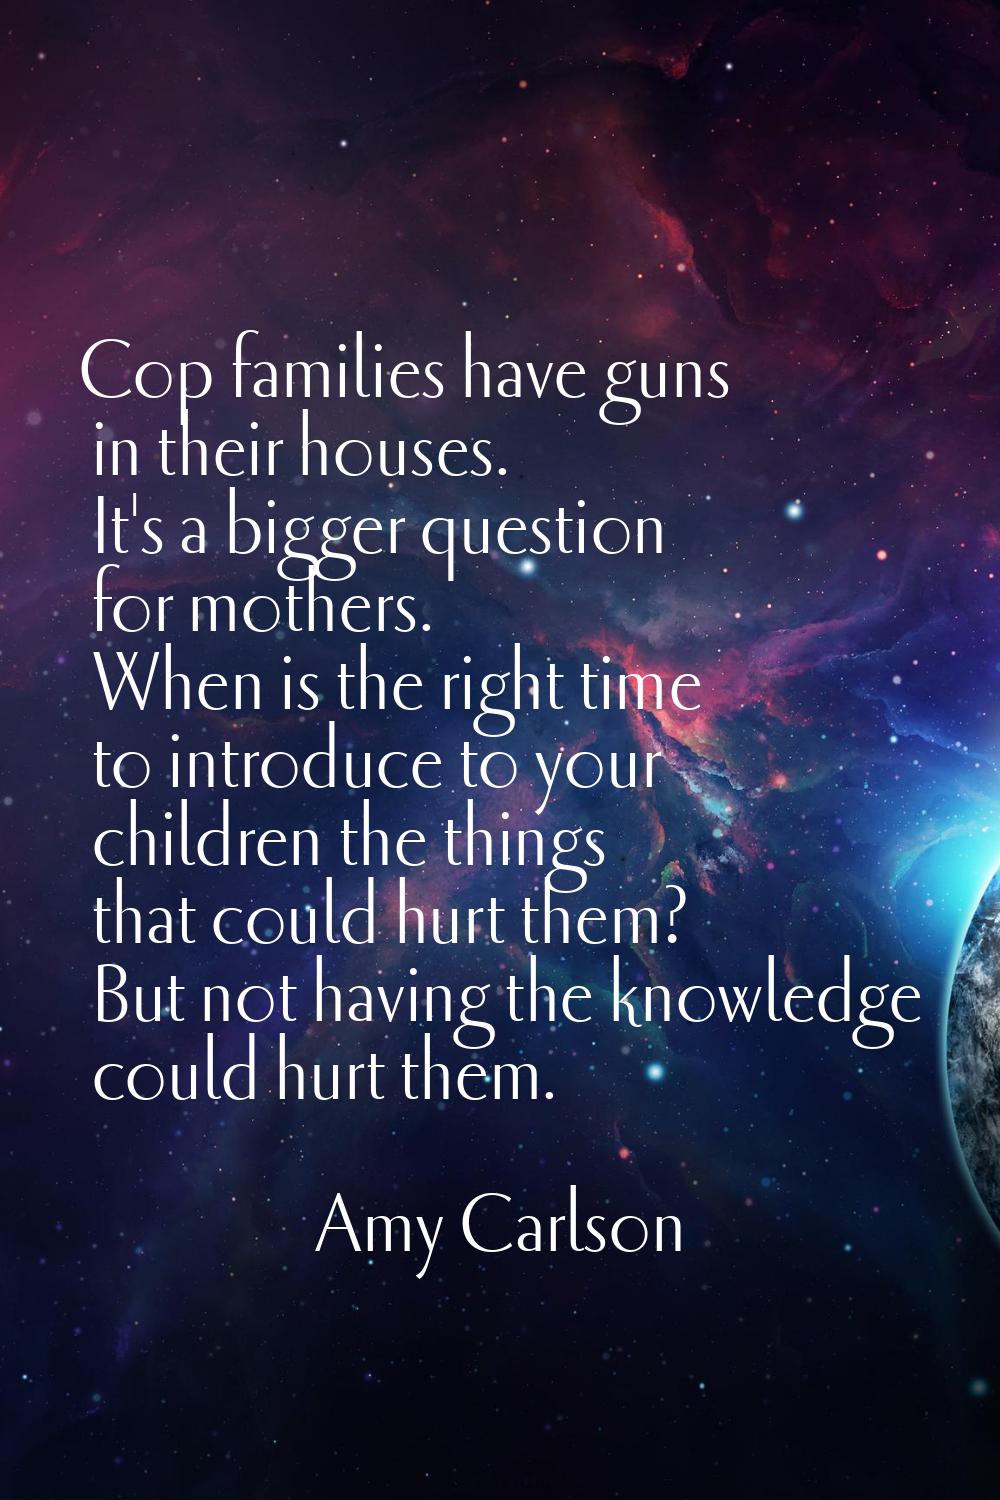 Cop families have guns in their houses. It's a bigger question for mothers. When is the right time 